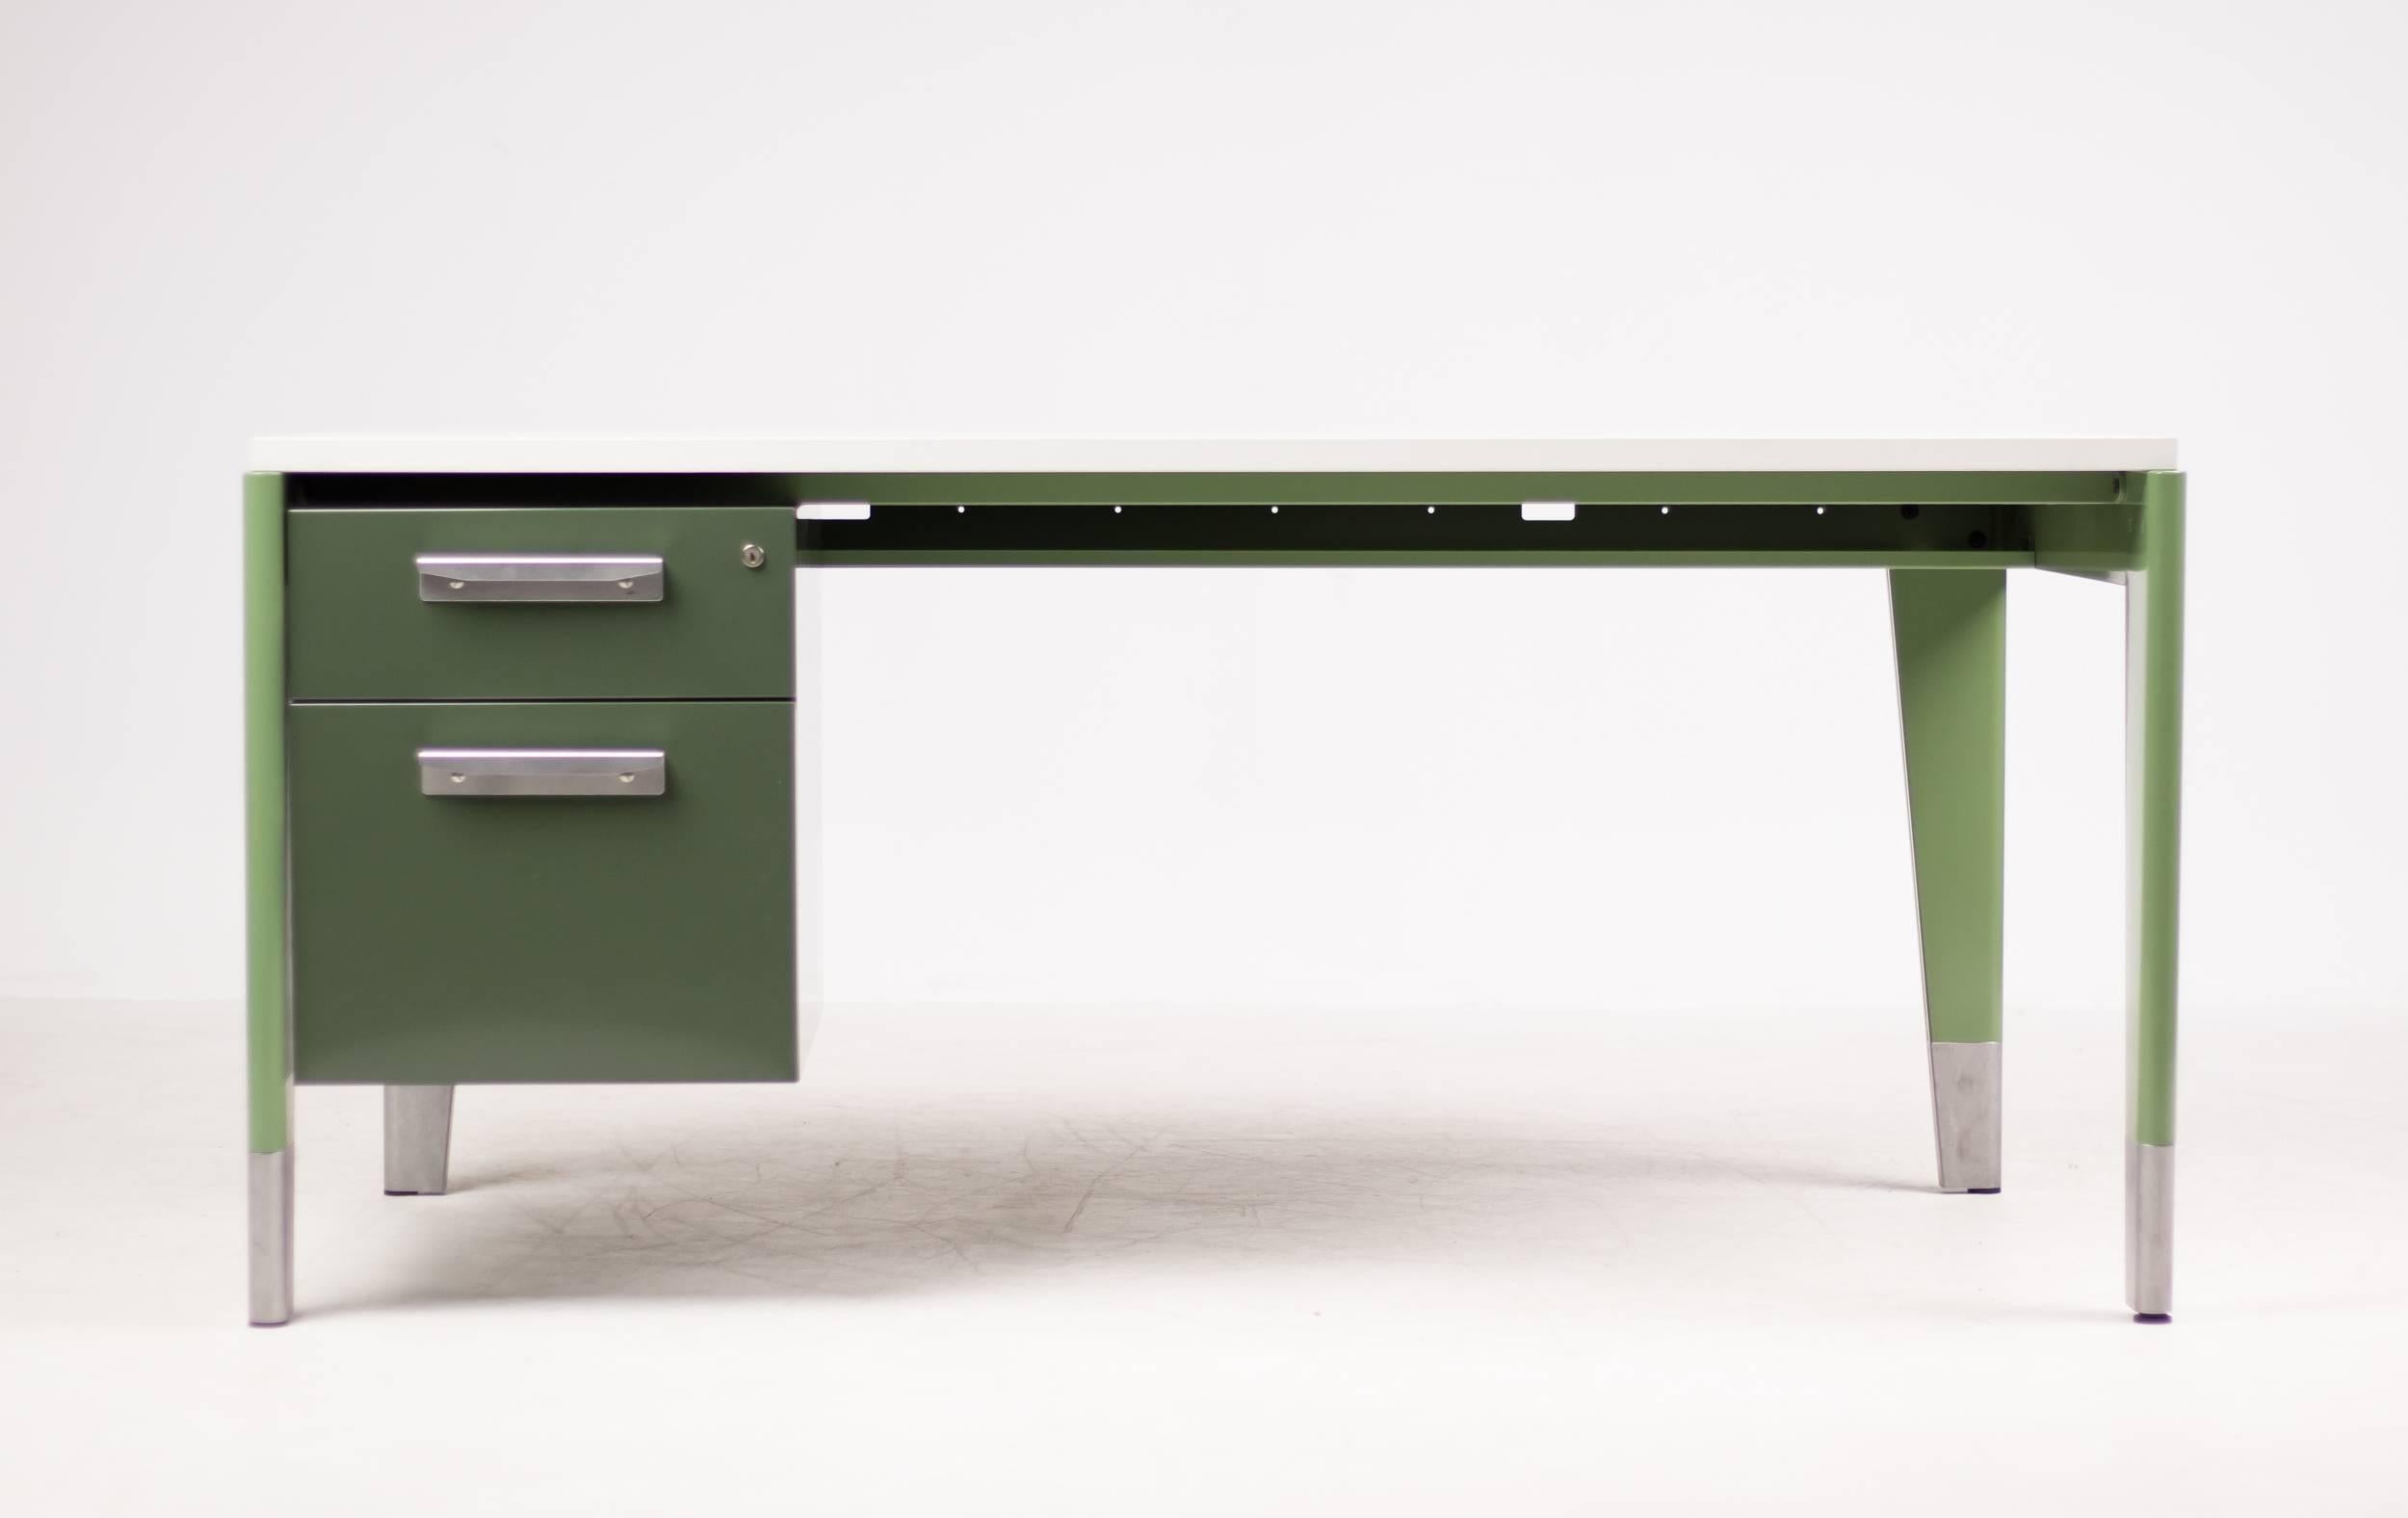 Limited edition desk from the G-Star Raw edition made by Vitra.
G-Star ordered these desks for their new Headquarters in Amsterdam by the architect Rem Koolhaas. They where also available for a limited time for other Prouvé collectors.